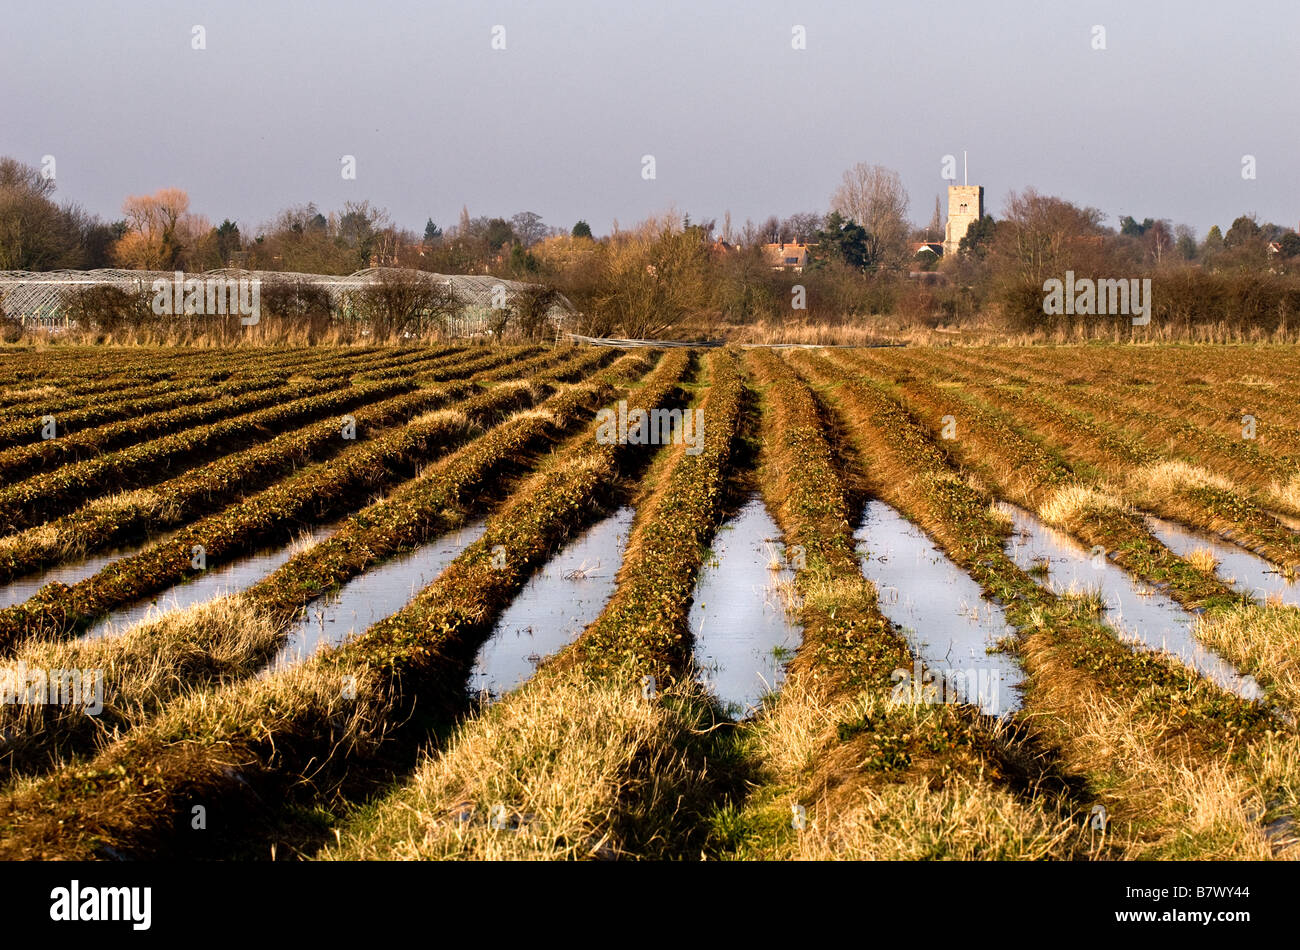 Waterlogged furrows in a field Stock Photo